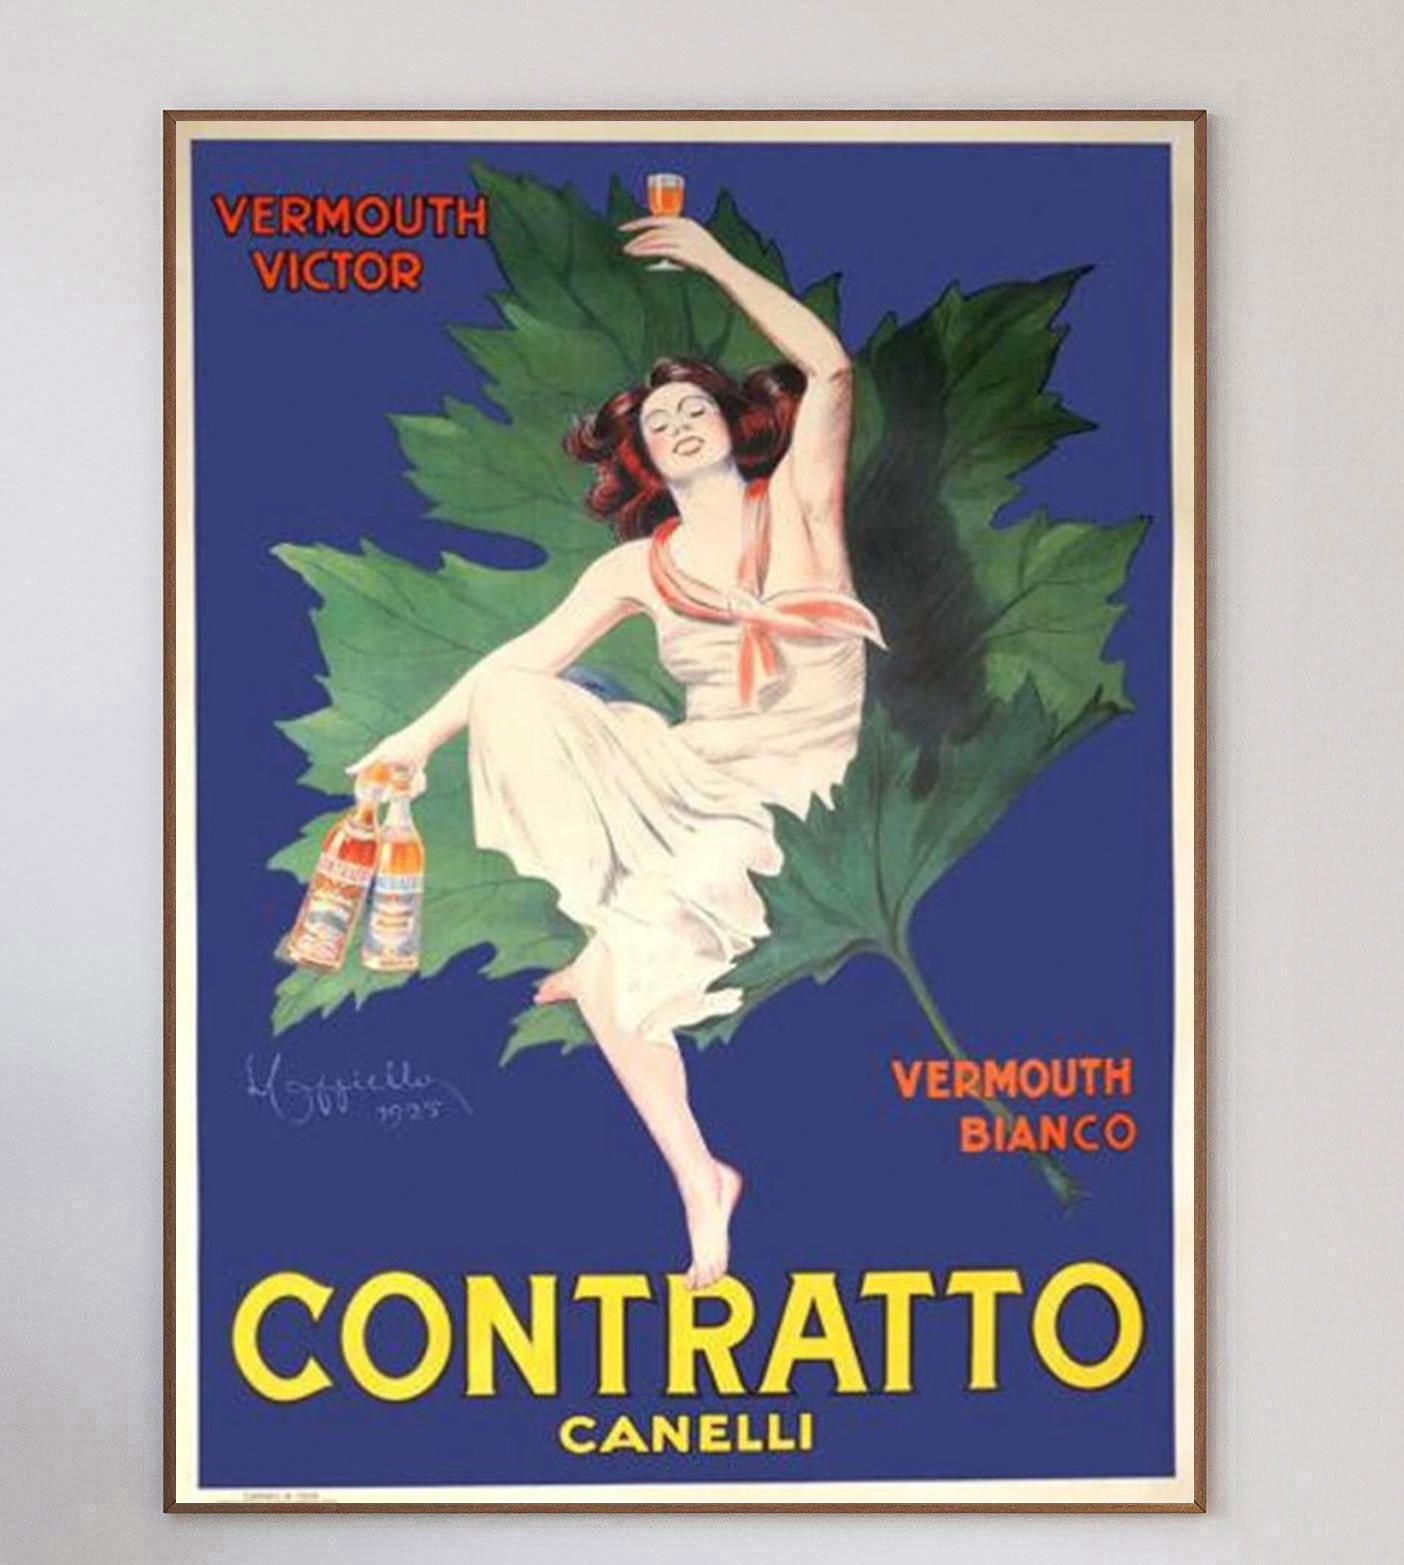 Founded in 1867 in Italy by Giuseppe Contratto, Contratto began as a winery before producing vermouths and liqueurs in 1920. This stunning extra-large poster features artwork from Leonetto Cappiello and depicts a woman in a leaf with the Vermouth,